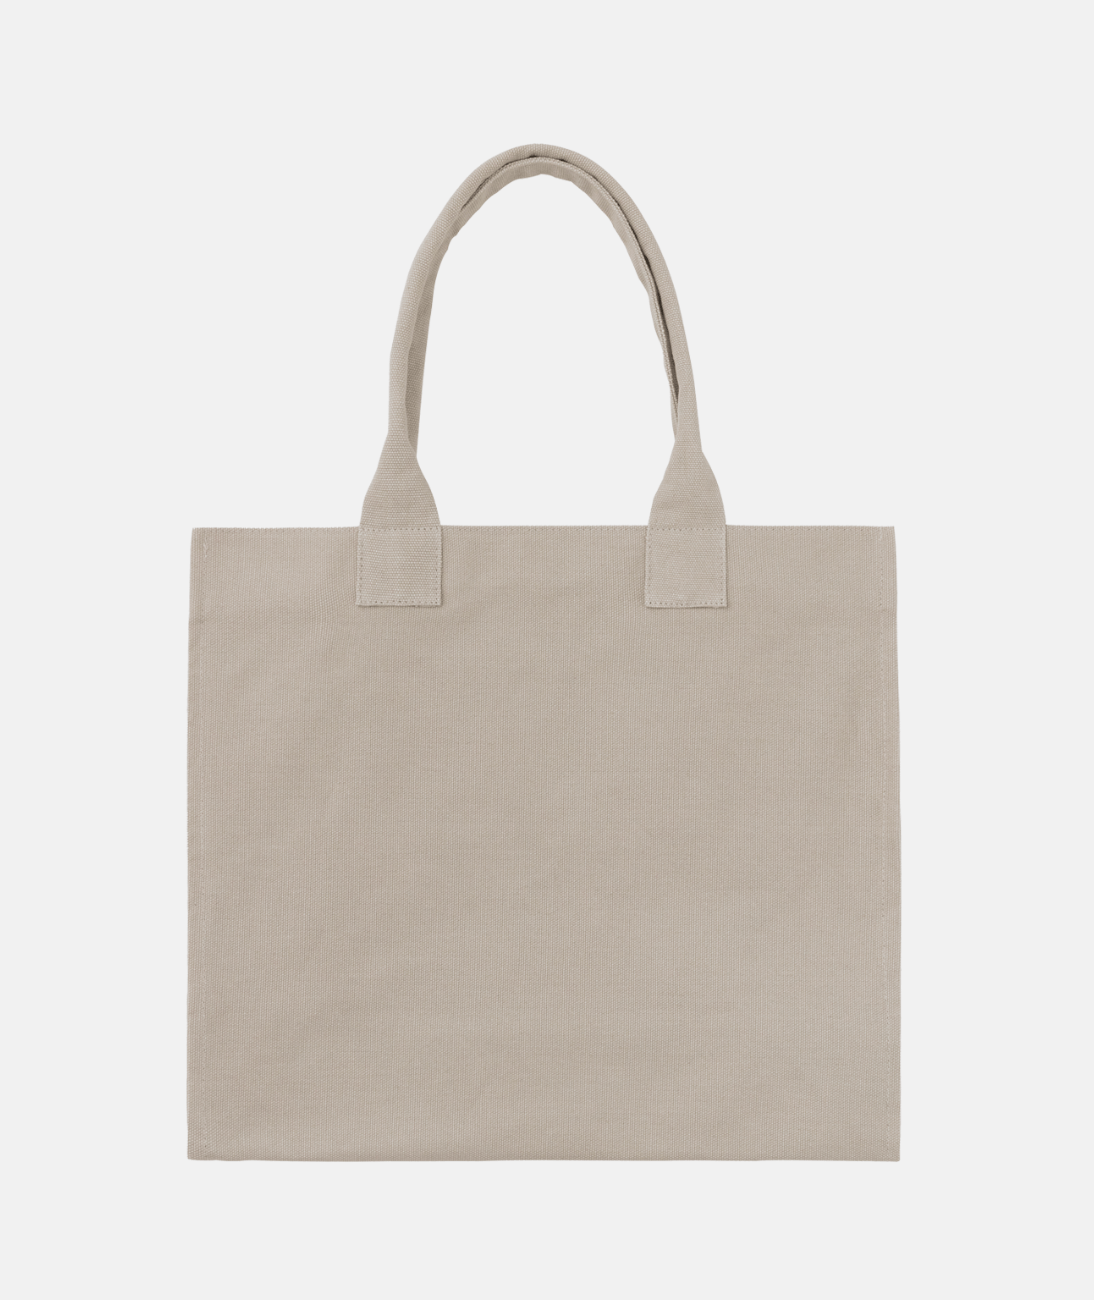 High-Quality Bulk Tote Bags and Accessories